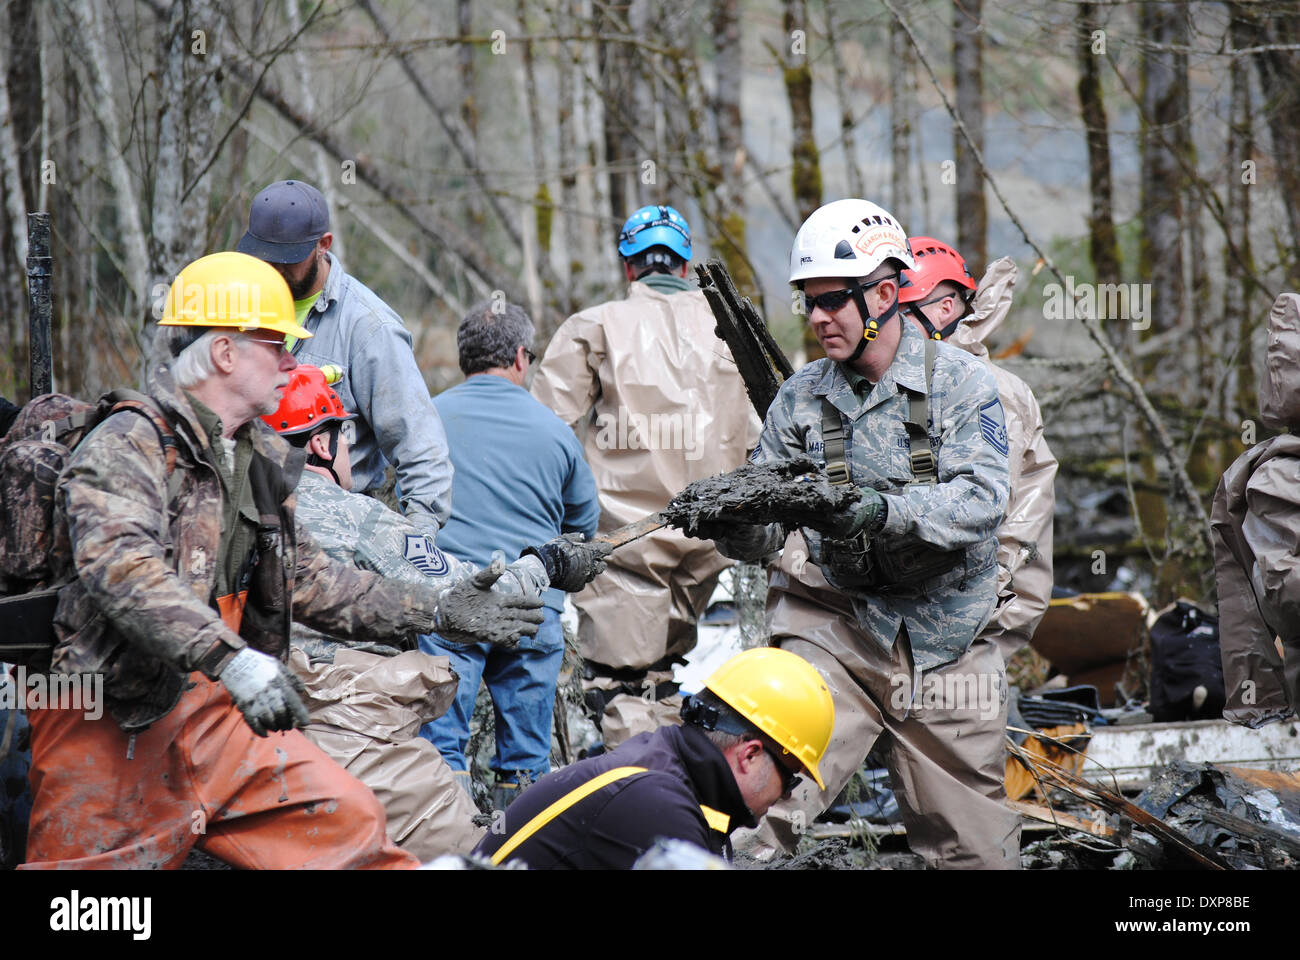 Rescue workers continue efforts to locate victims of a massive landslide that killed at least 28 people and destroyed a small riverside village in northwestern Washington state March 26, 2014 in Oso, Washington. Stock Photo